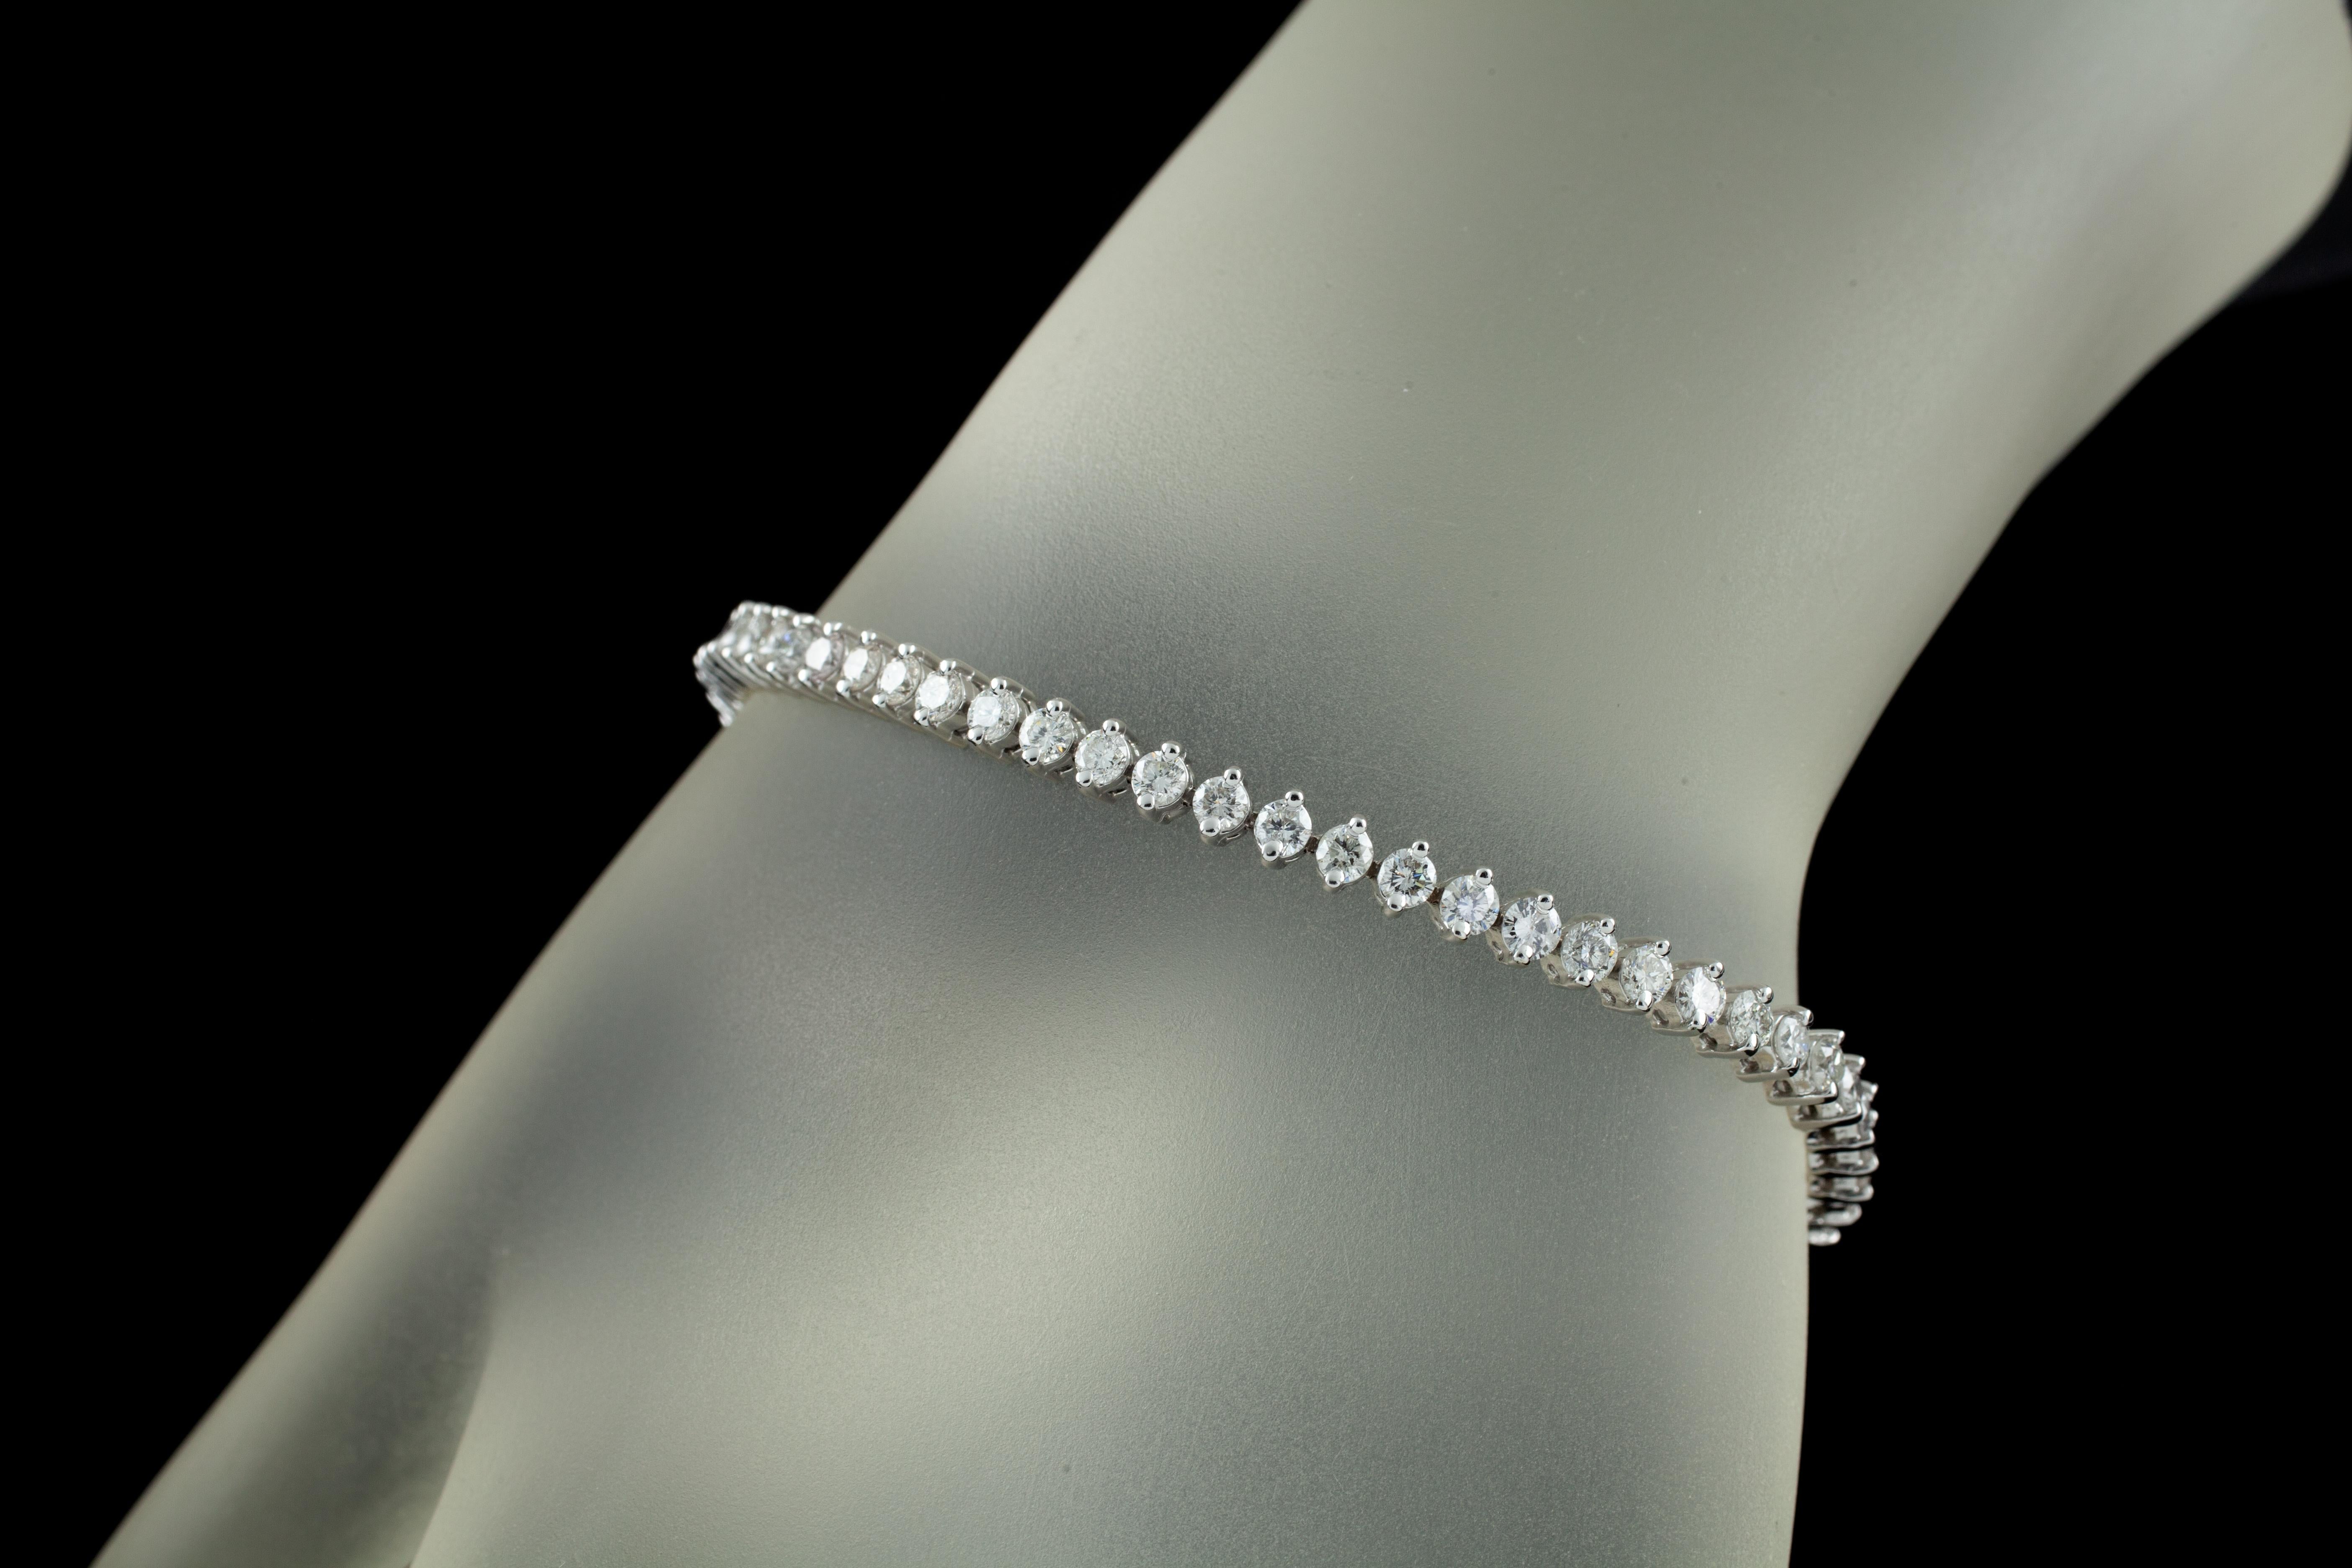 Gorgeous 14k White Gold Tennis Bracelet!
Features Approximately 5.50 ct of Round Diamonds in Prong Settings
Average Color = G - H
Average Clarity = SI
Total Length = 6.75